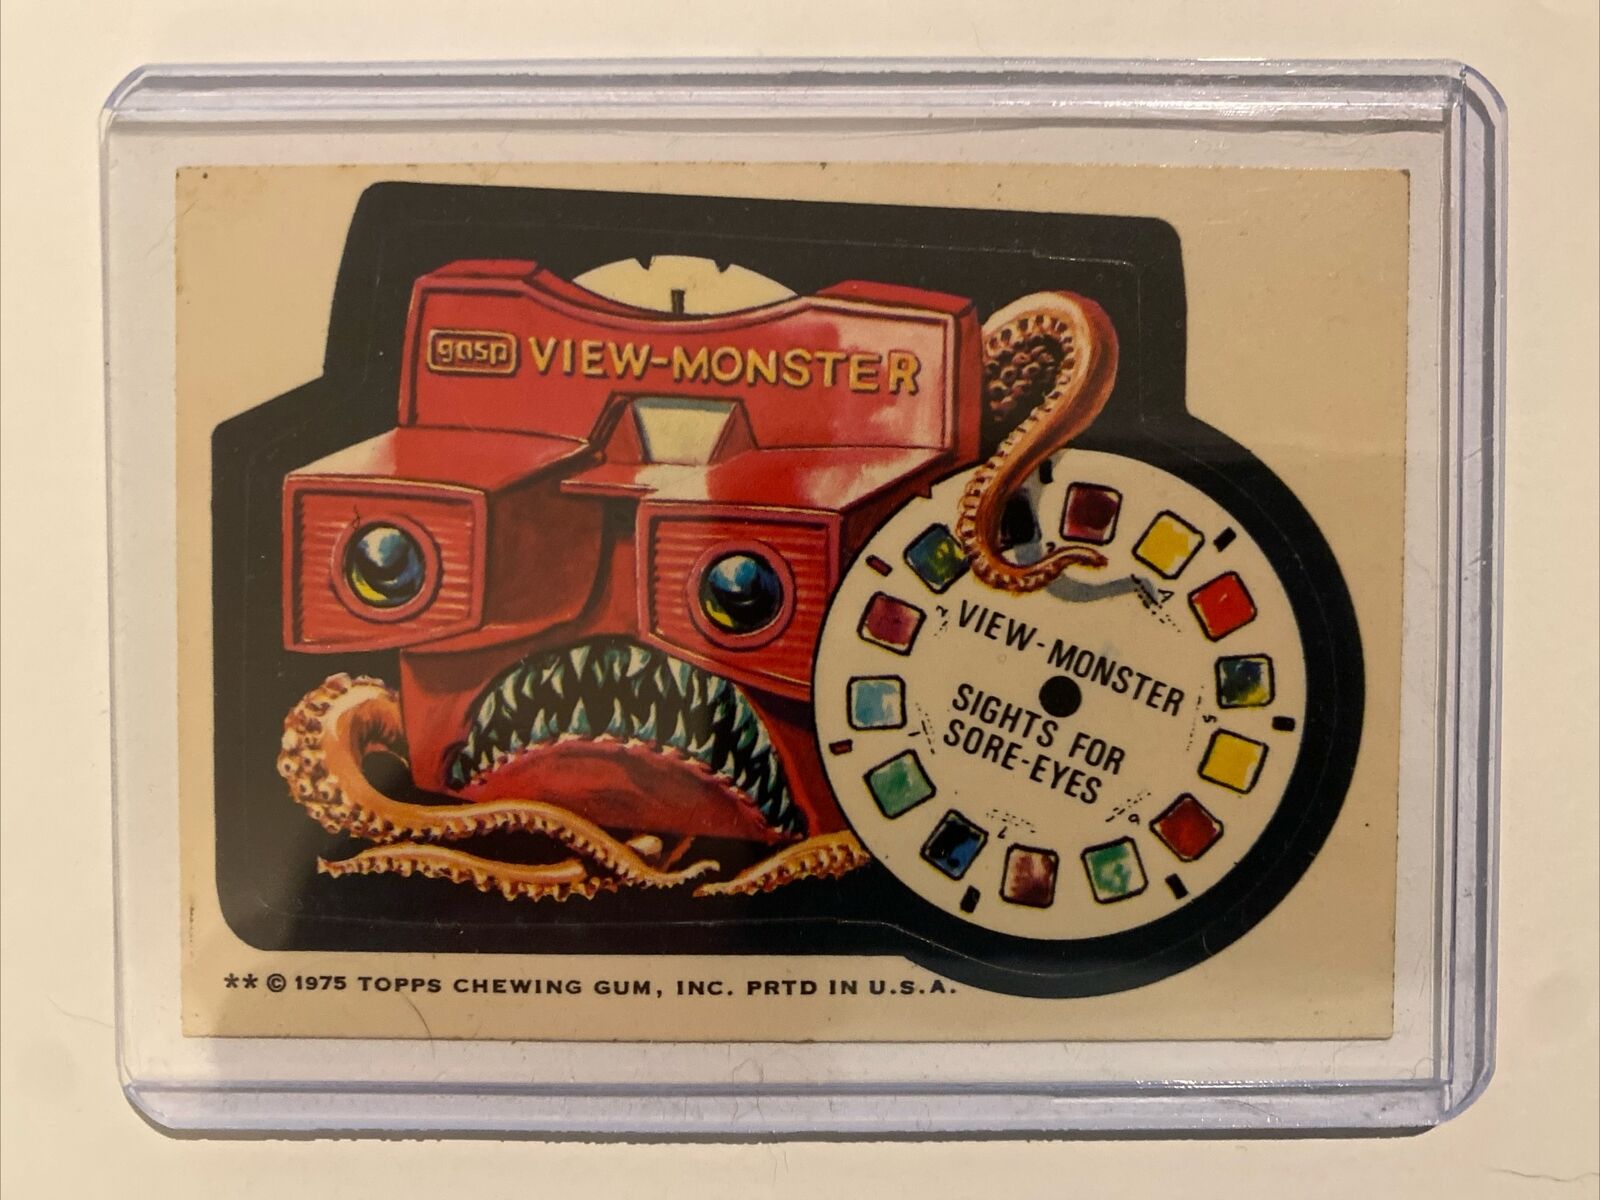 Vintage Topps 1975 Wacky Packages - VIEW-MONSTER -Trading Card Sticker